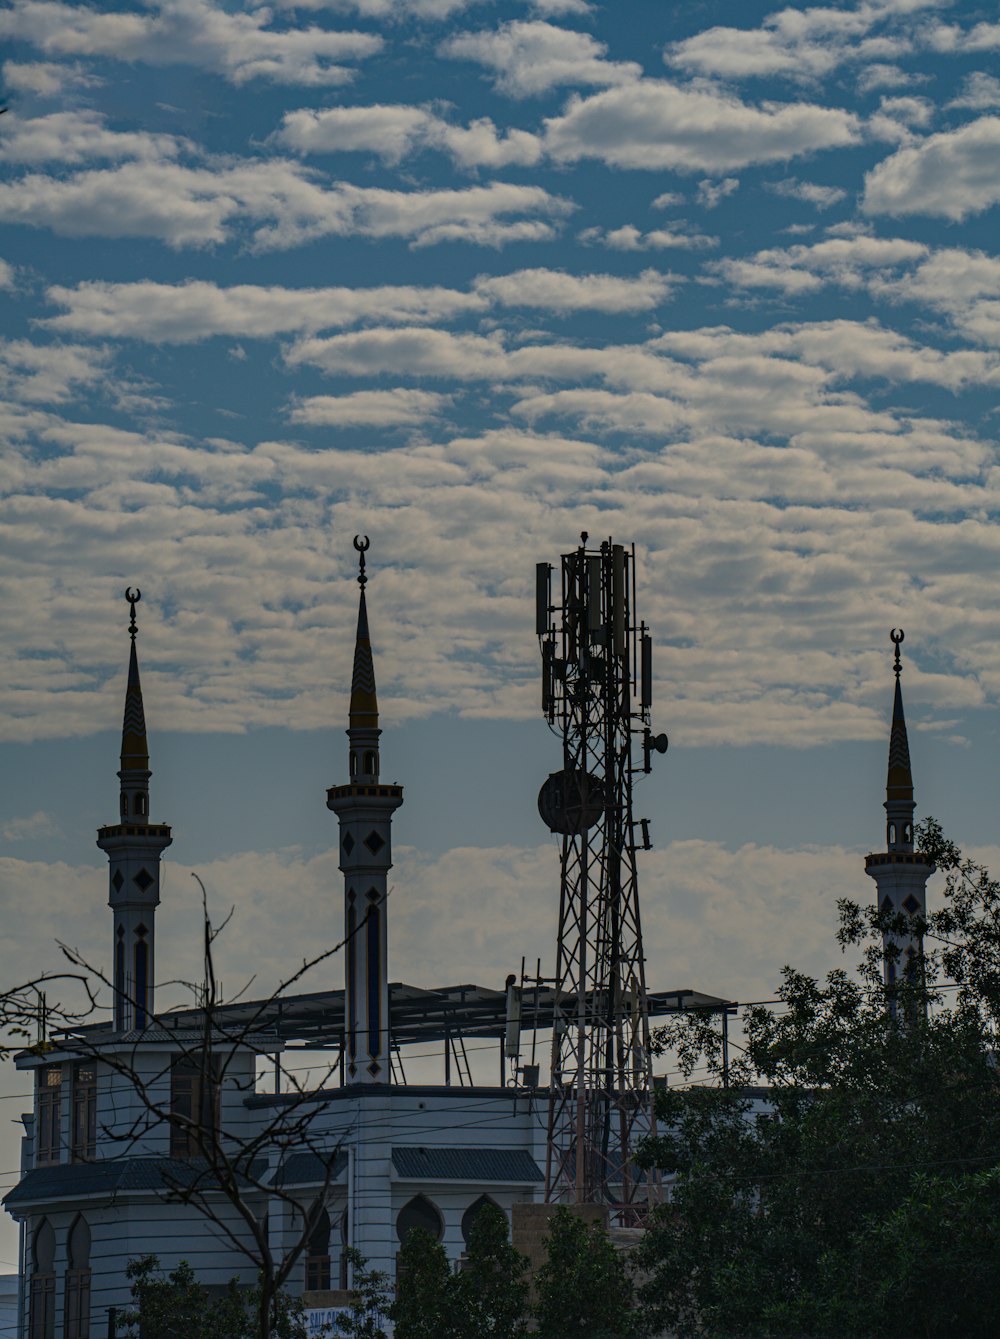 a view of a building with a cell phone tower in the foreground